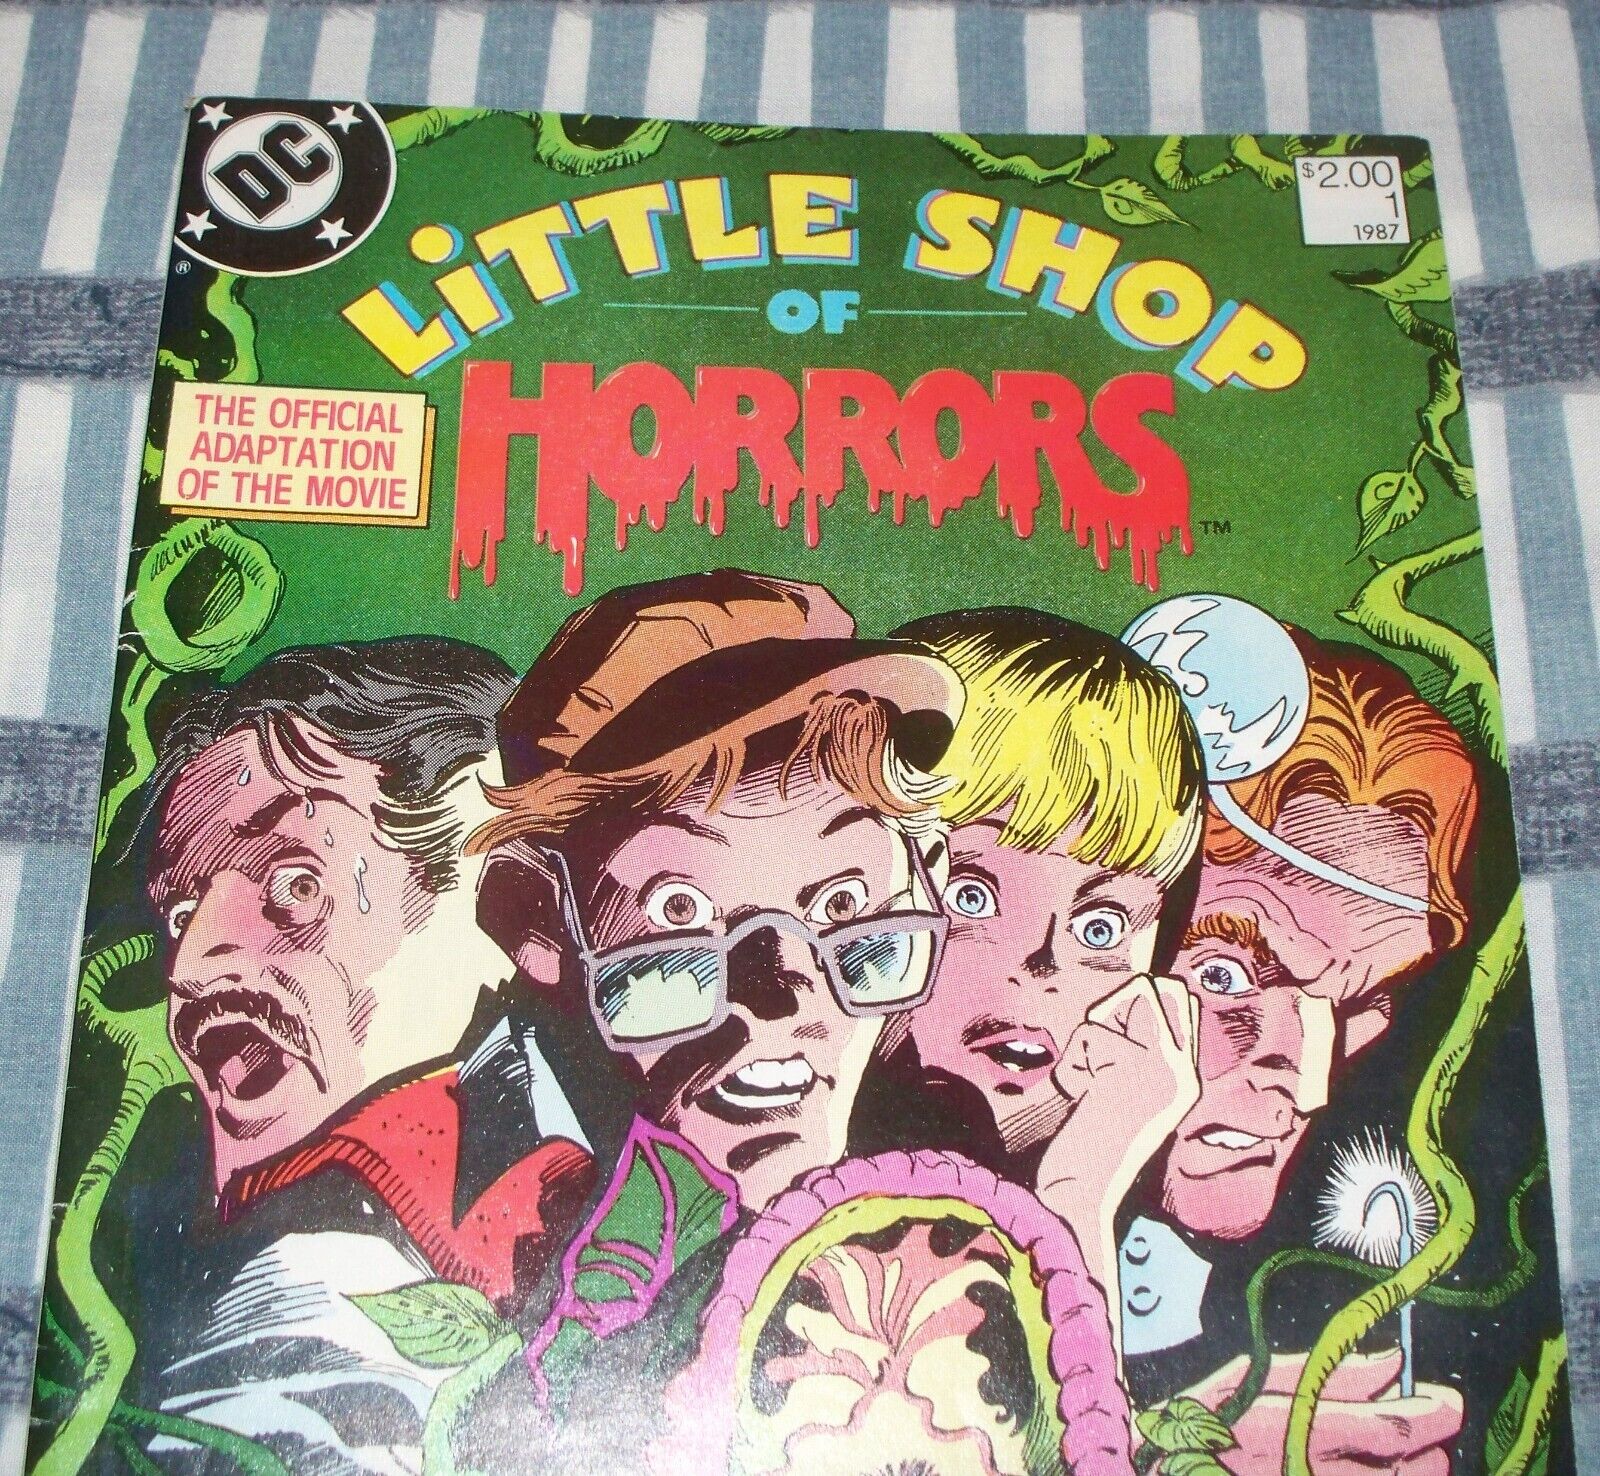 Rare Double Cover Little Shop of Horrors #1 Movie Ada from 1987 in VF- Condition